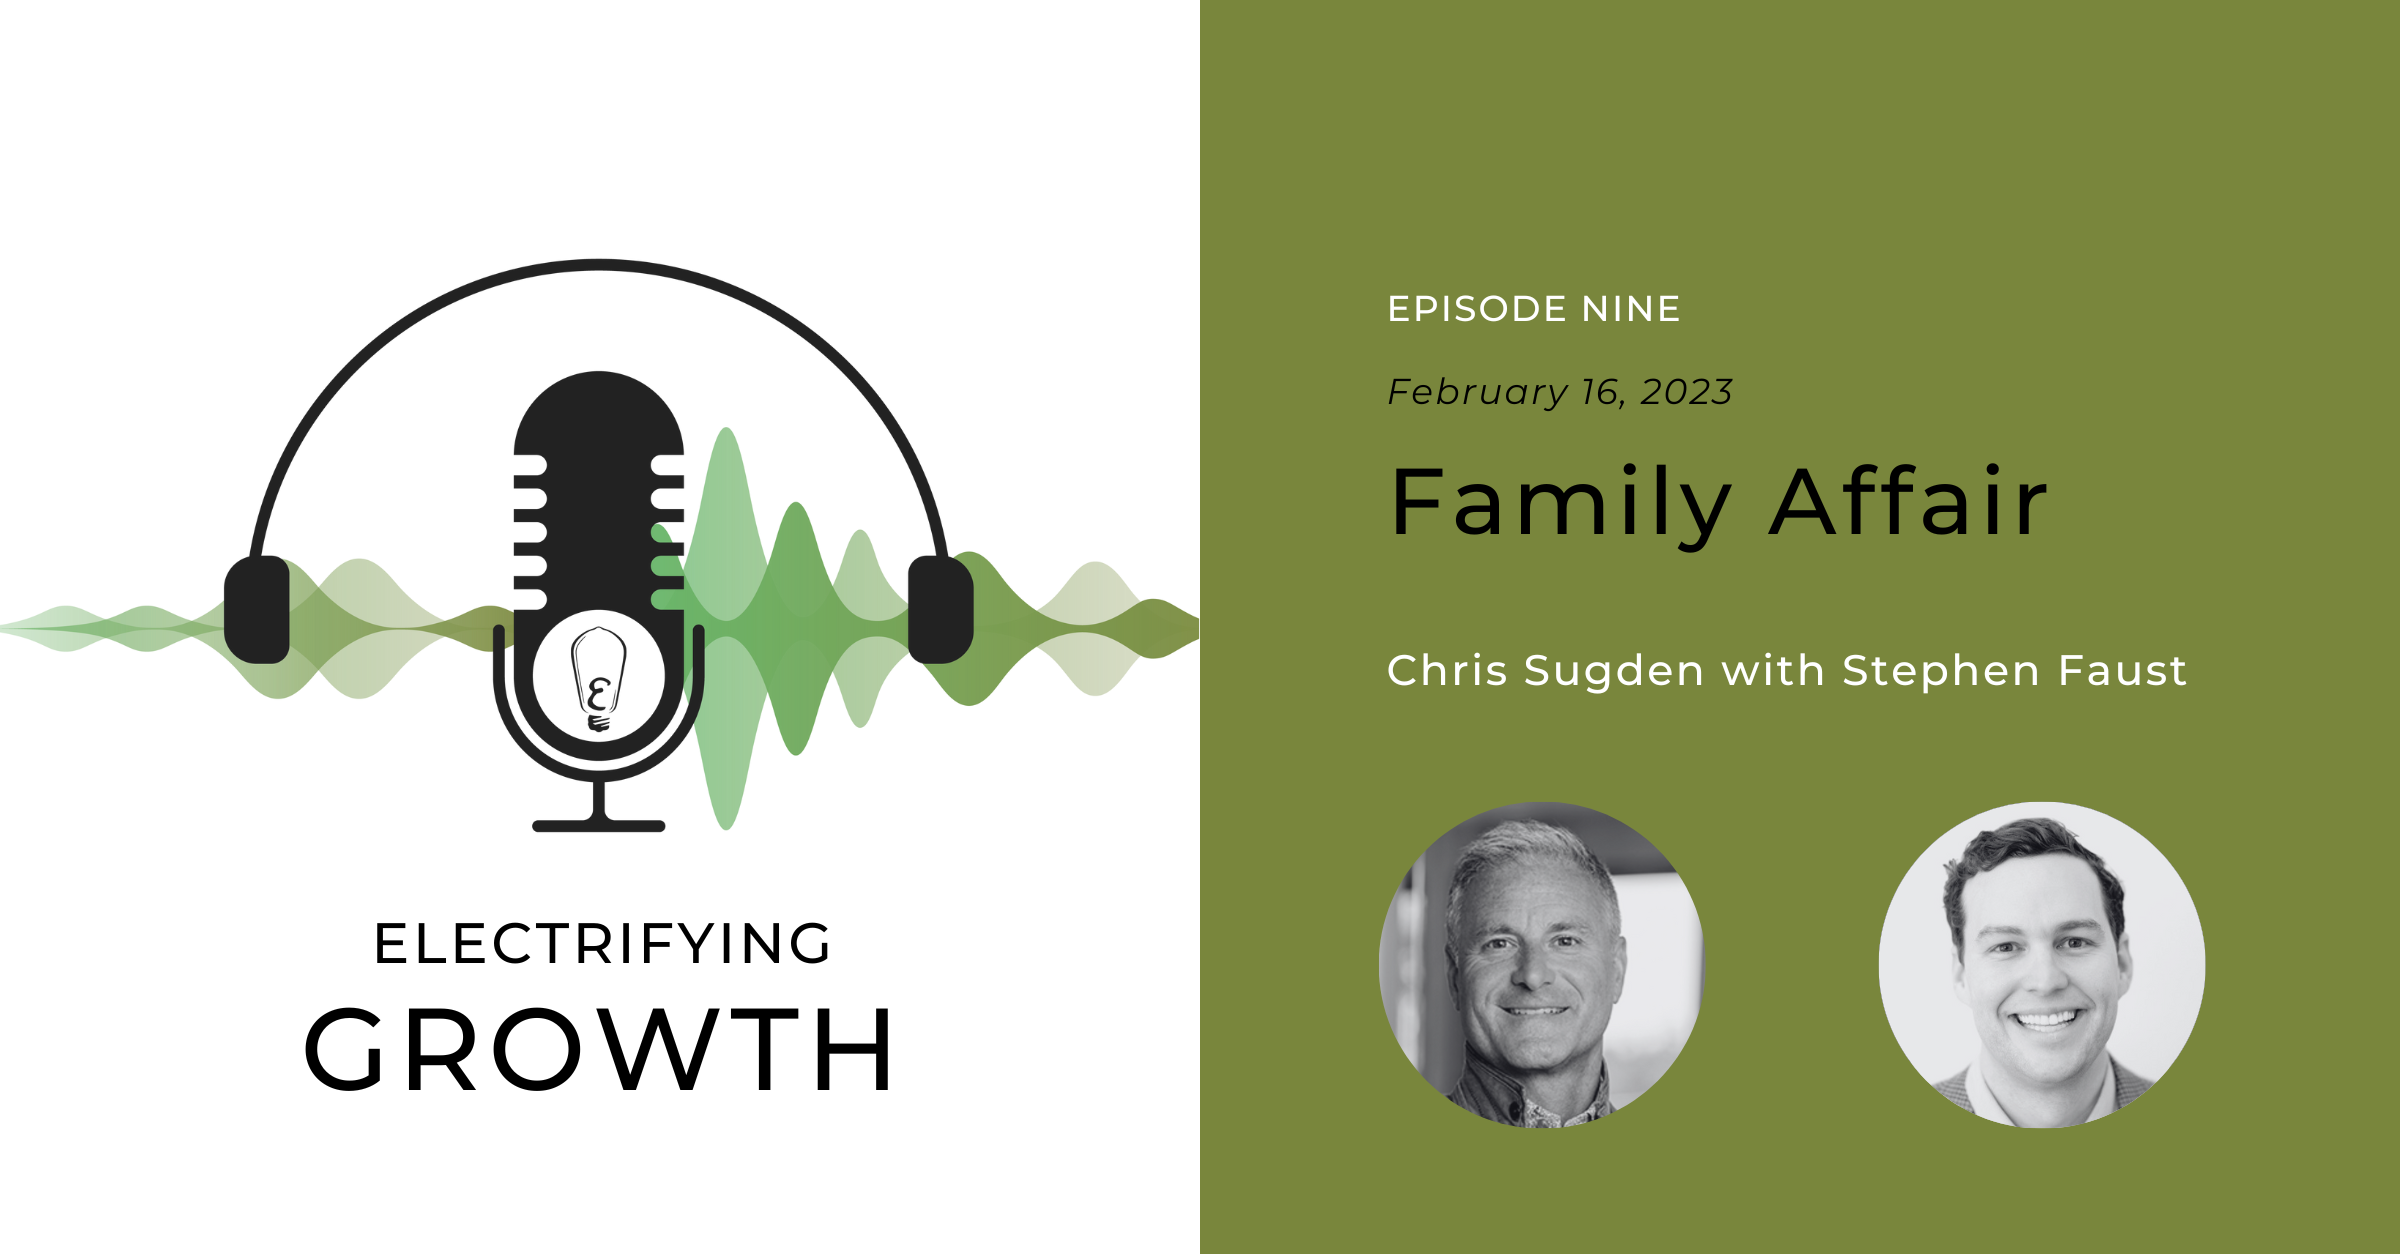 Electrifying Growth Episode 9: Family Affair with Stephen Faust